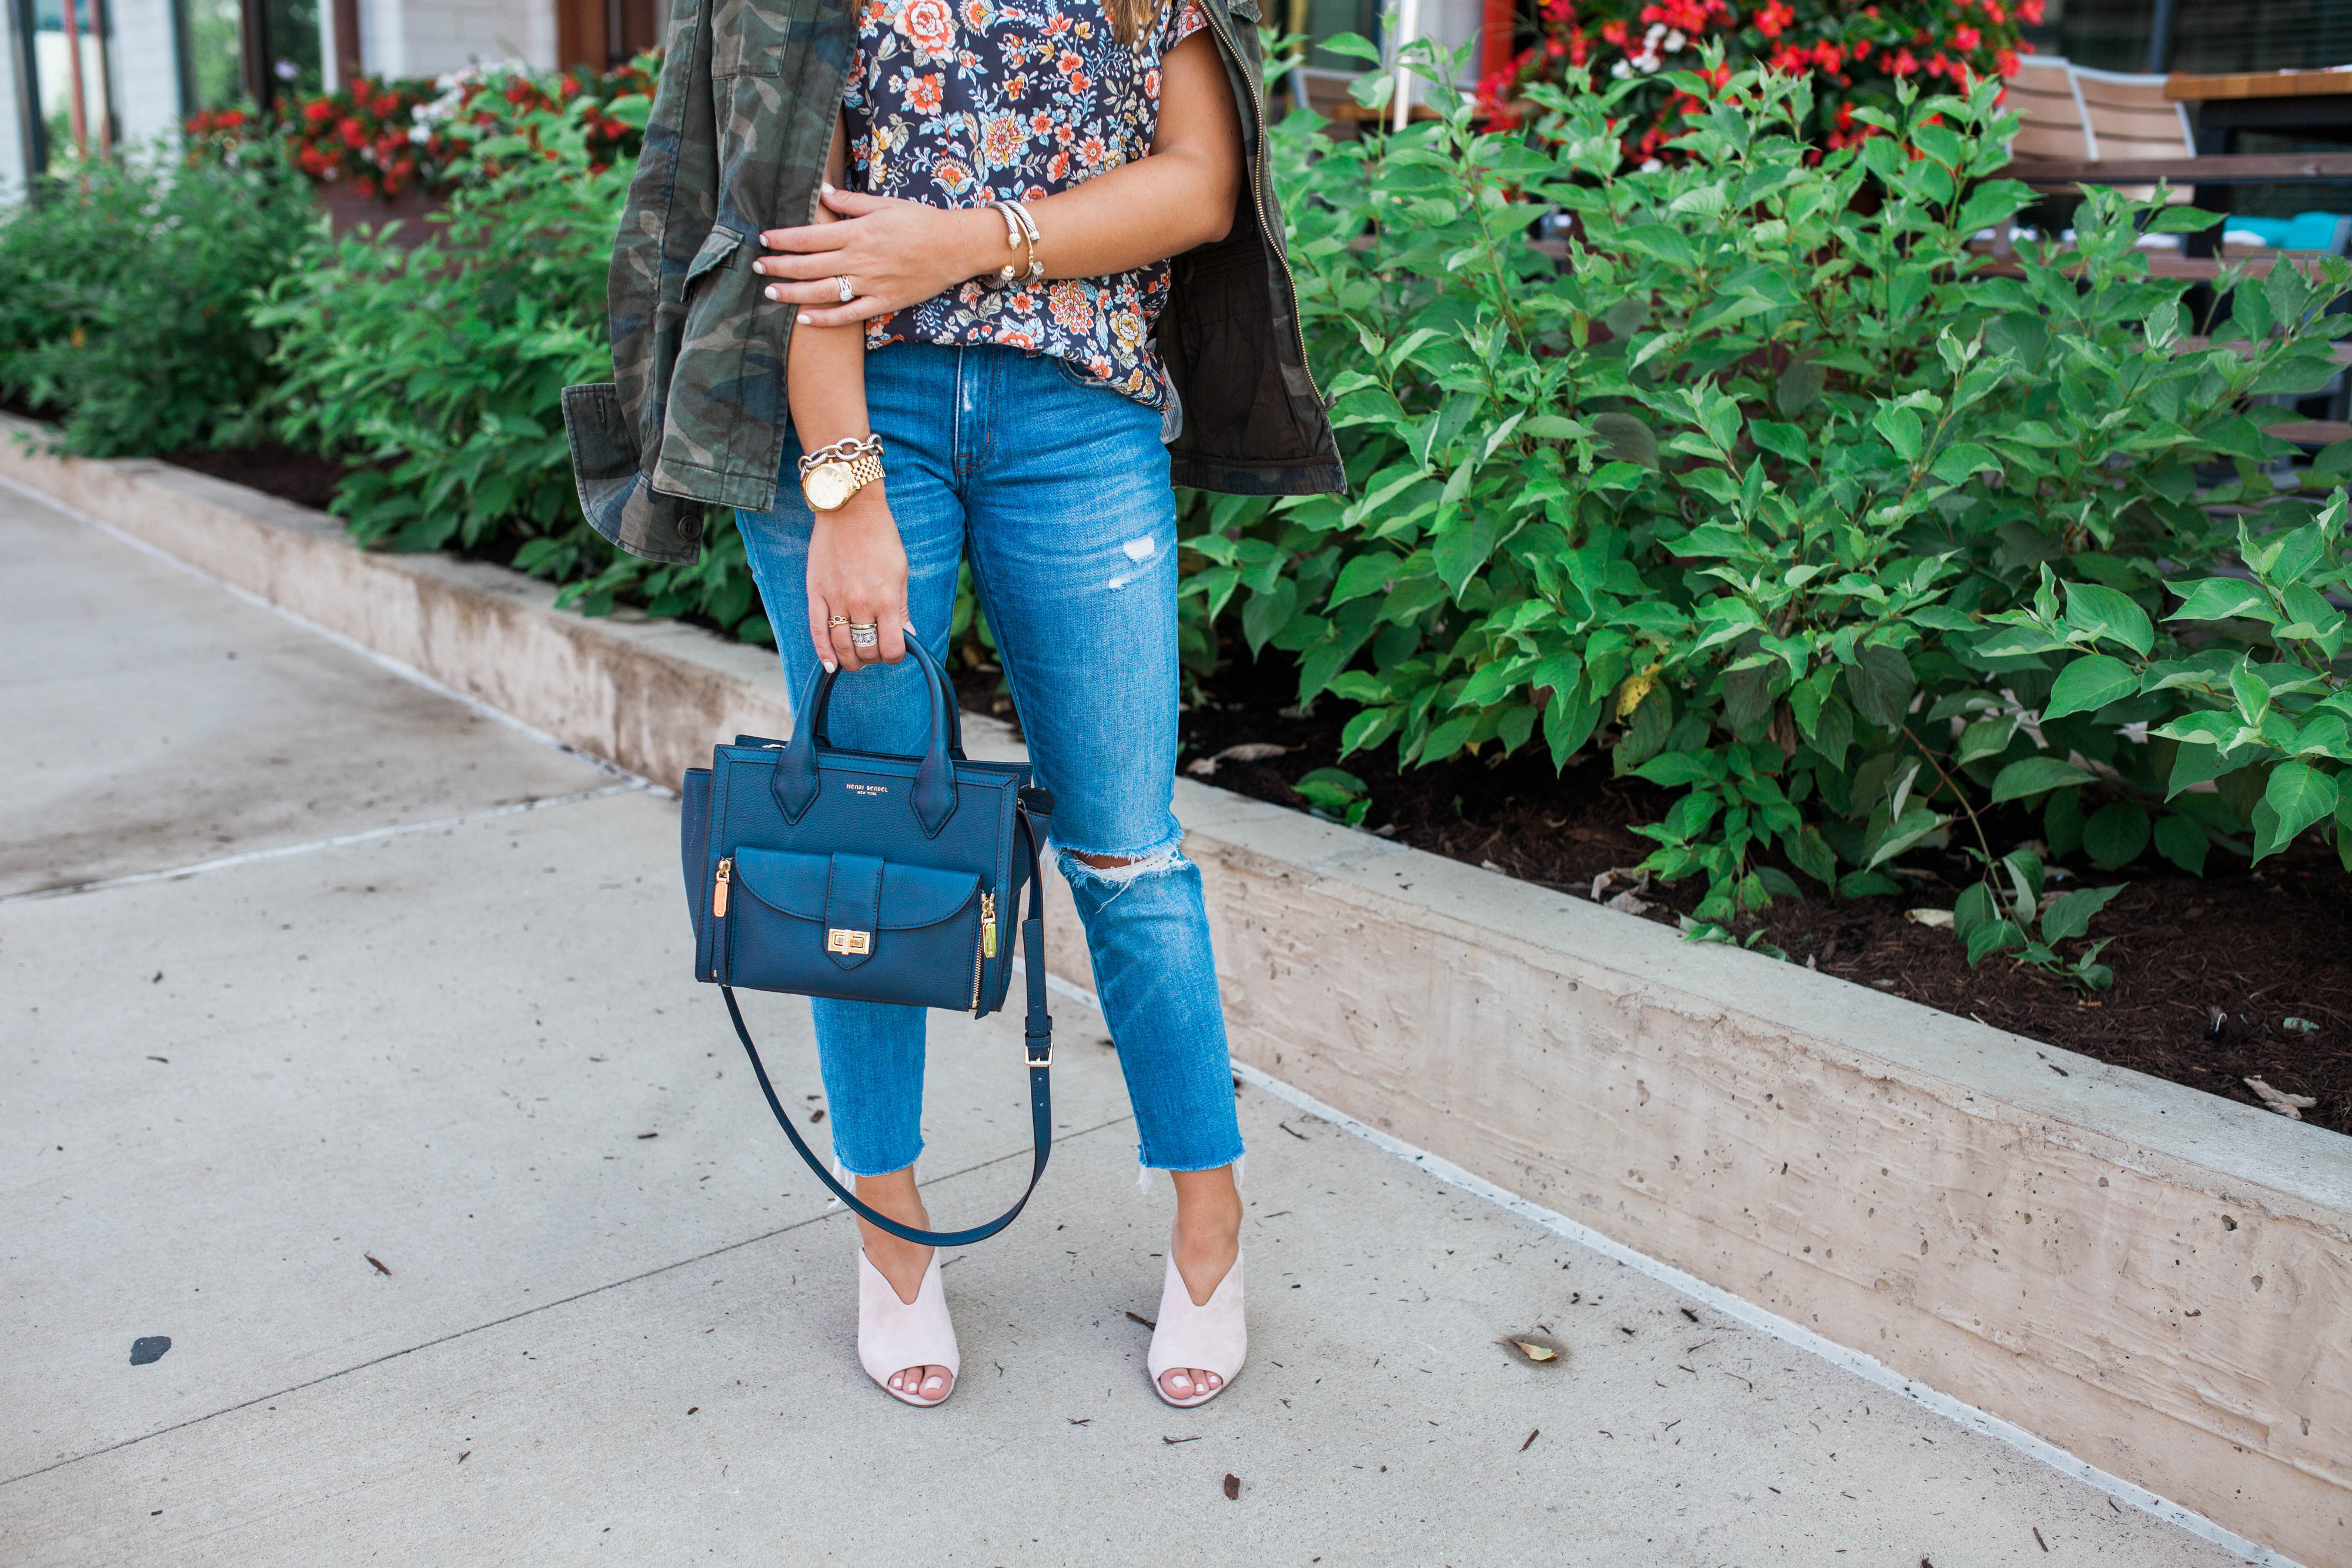 Fall Floral Blouse / Fall to summer style 